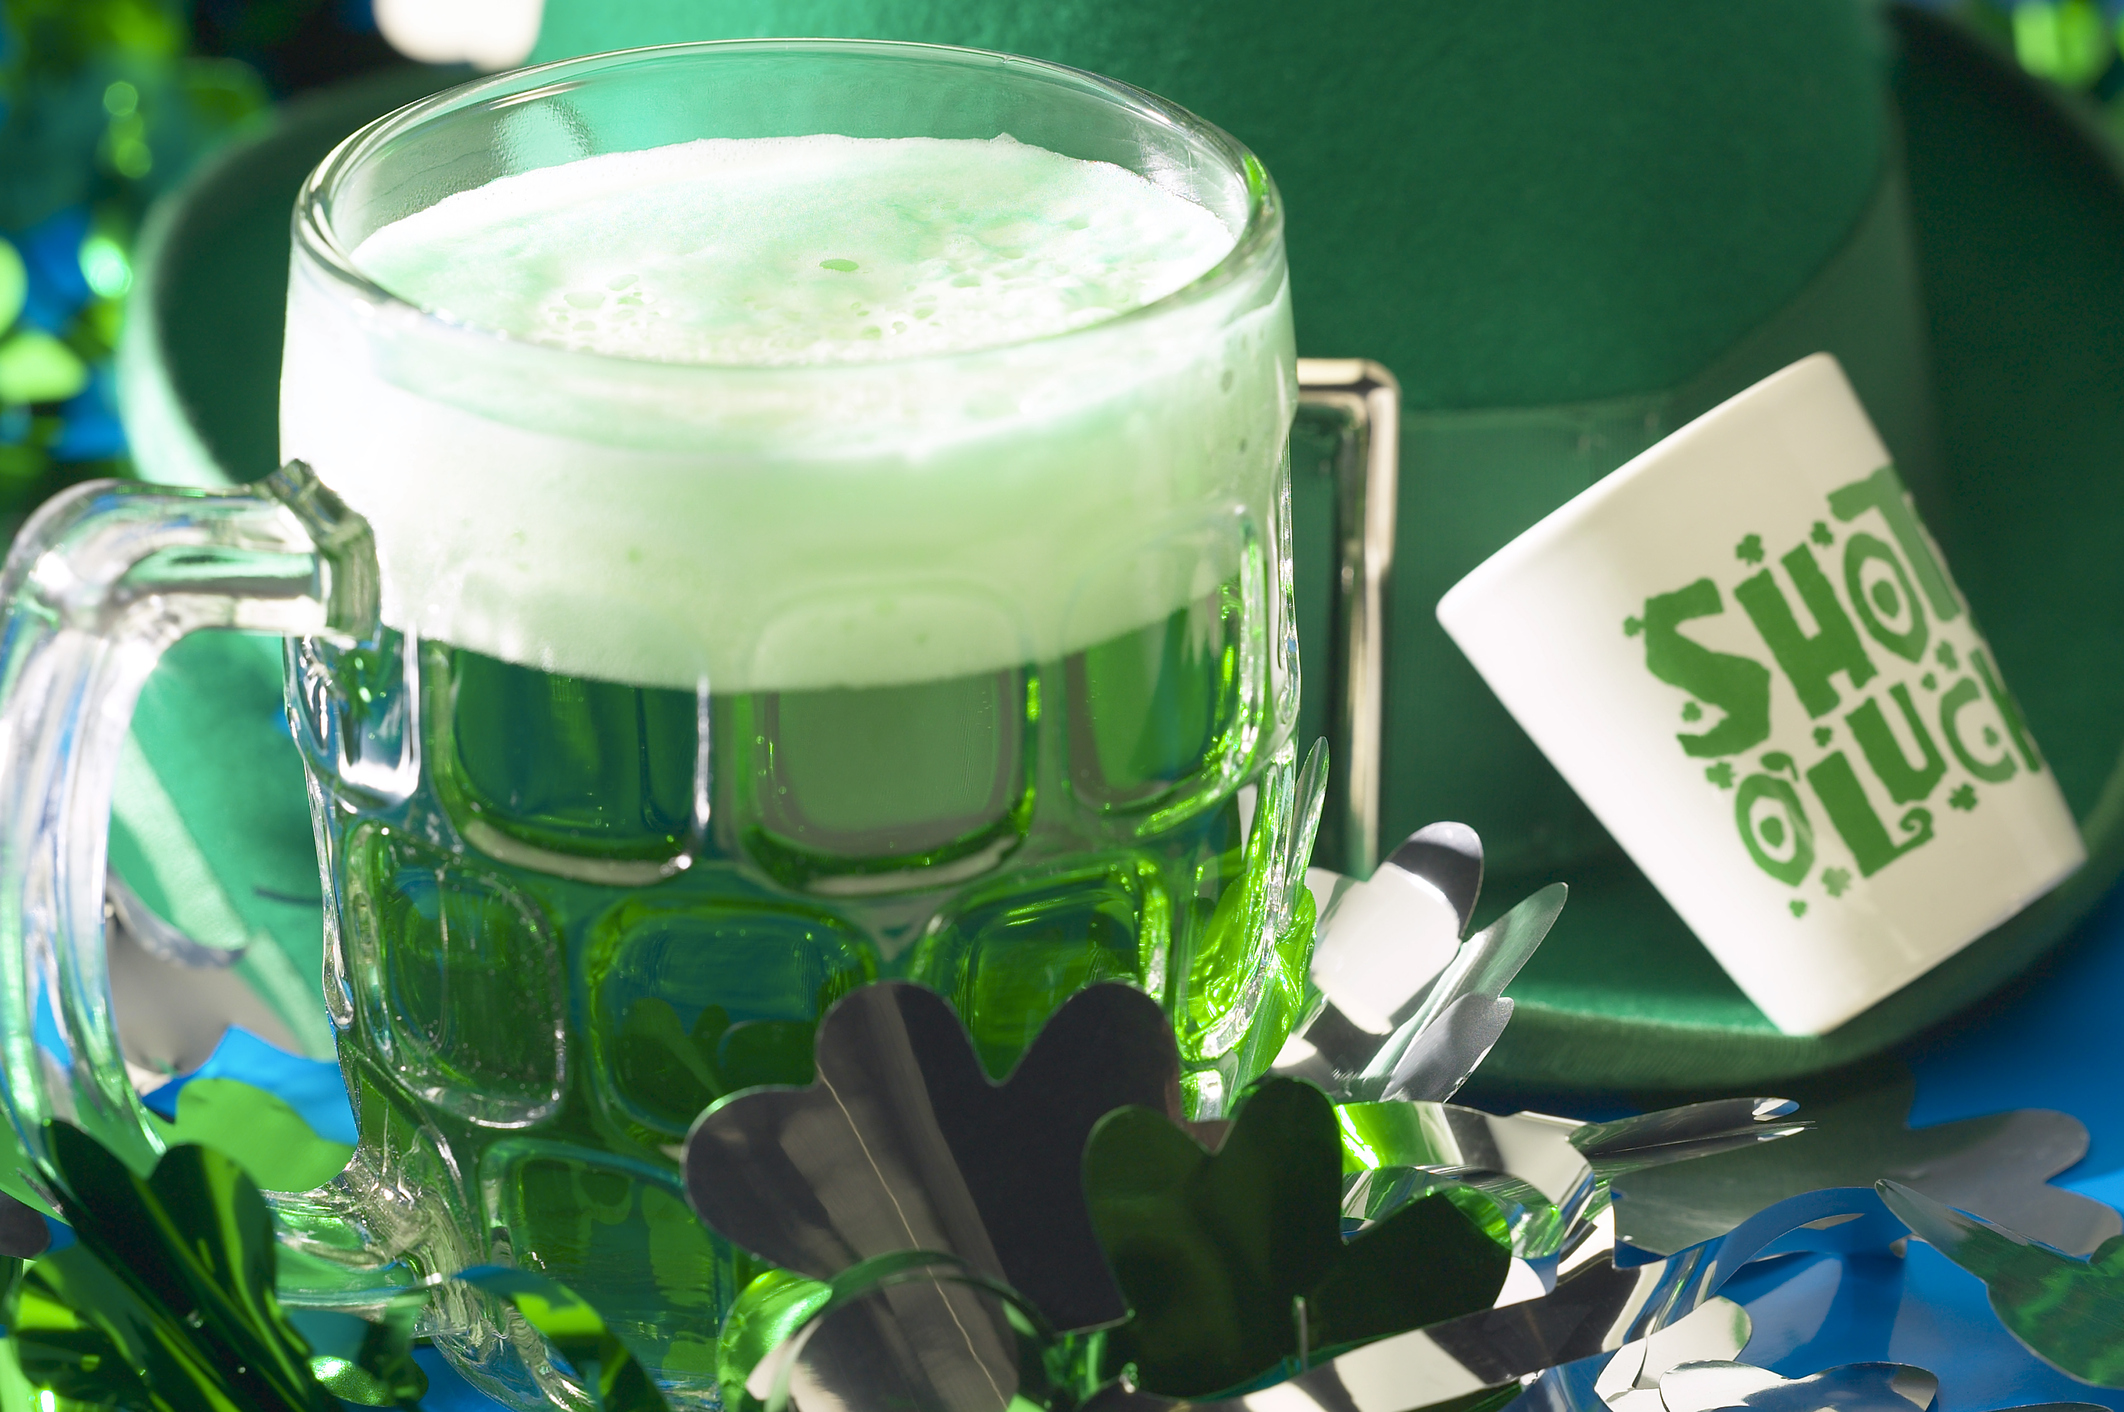 St Patricks Day Theme drink with decorations